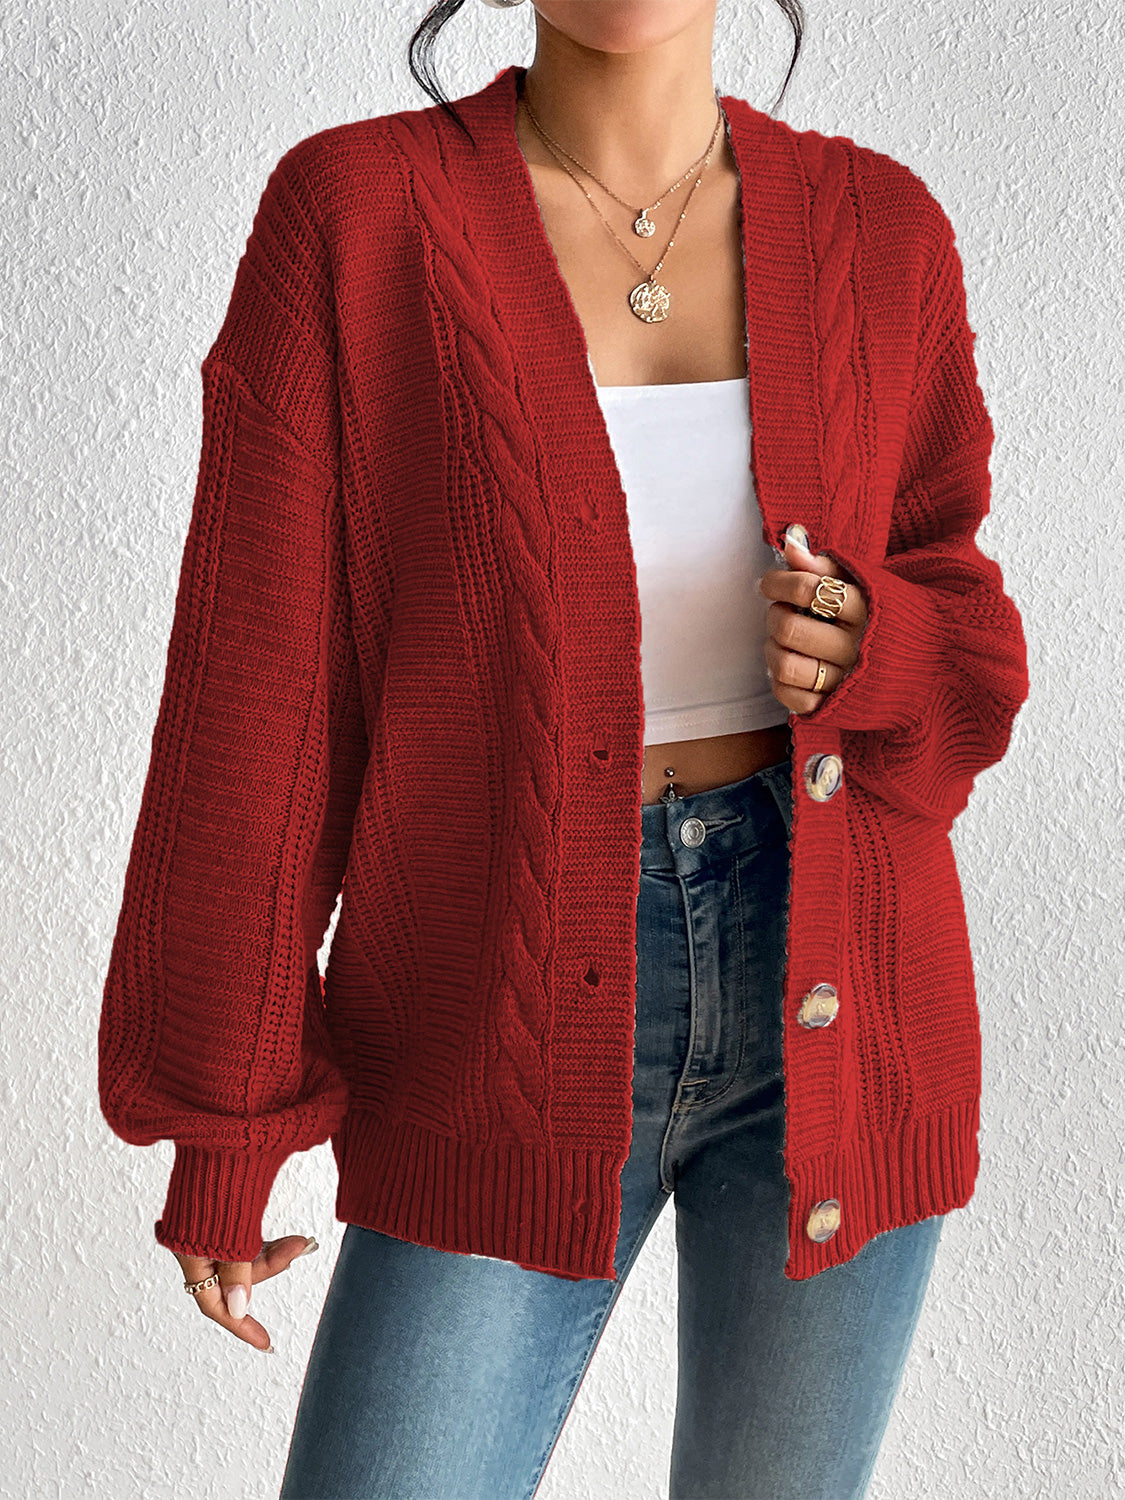 Cable-Knit Button Down Cardigan - Red / S - Women’s Clothing & Accessories - Shirts & Tops - 10 - 2024